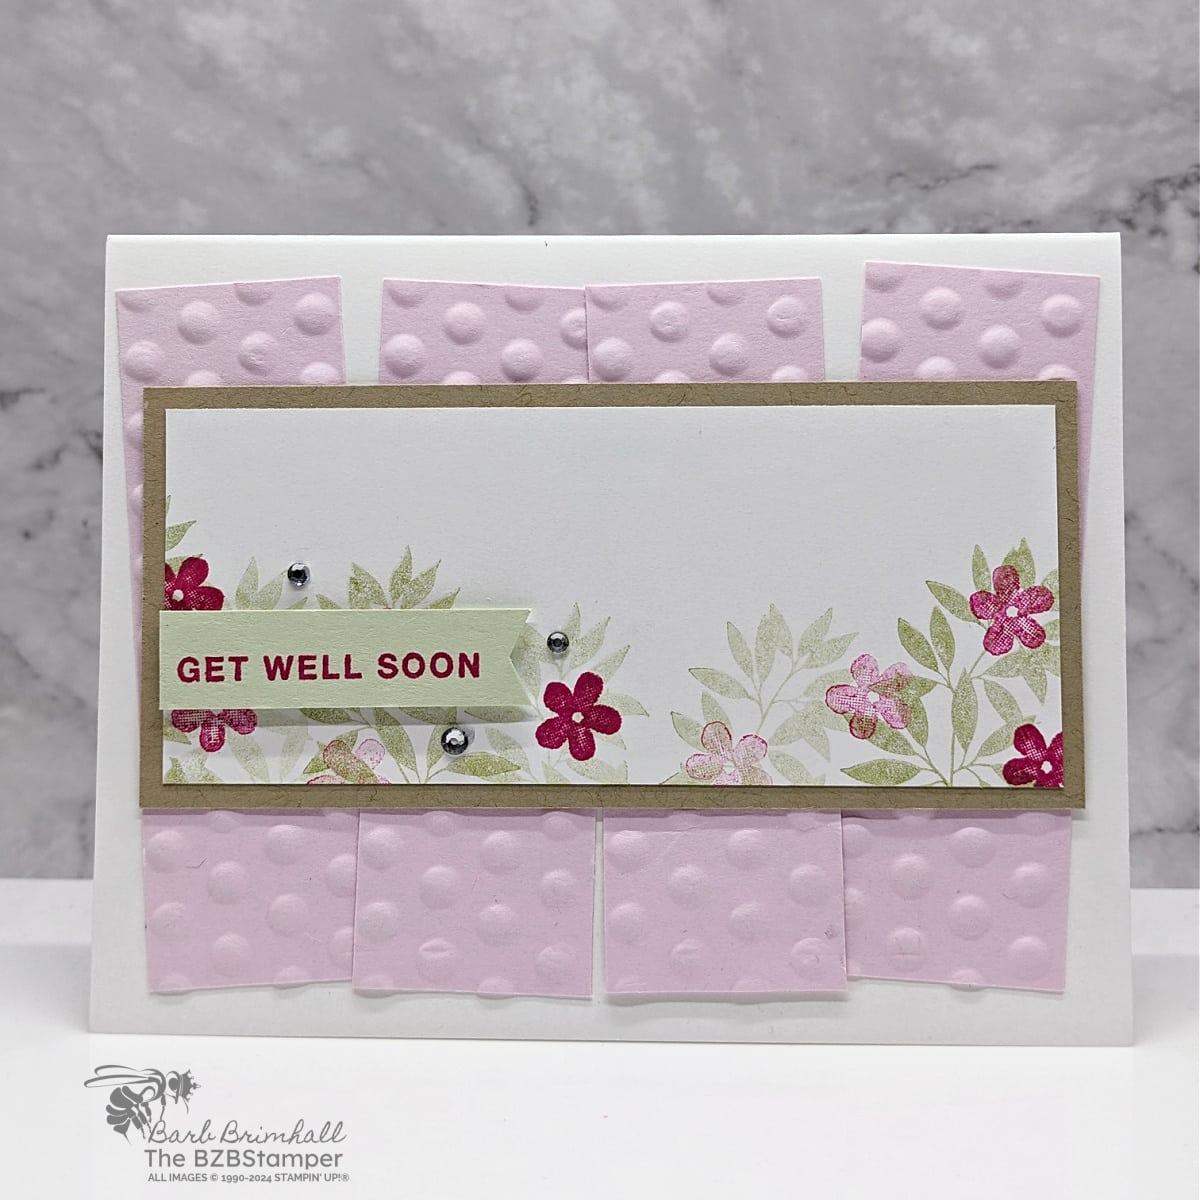 Get Well Card using the Darling Details Stamp Set  in pinks and soft green.  Embossed layer with flowers and leaves on a Kraft cardstock mat.